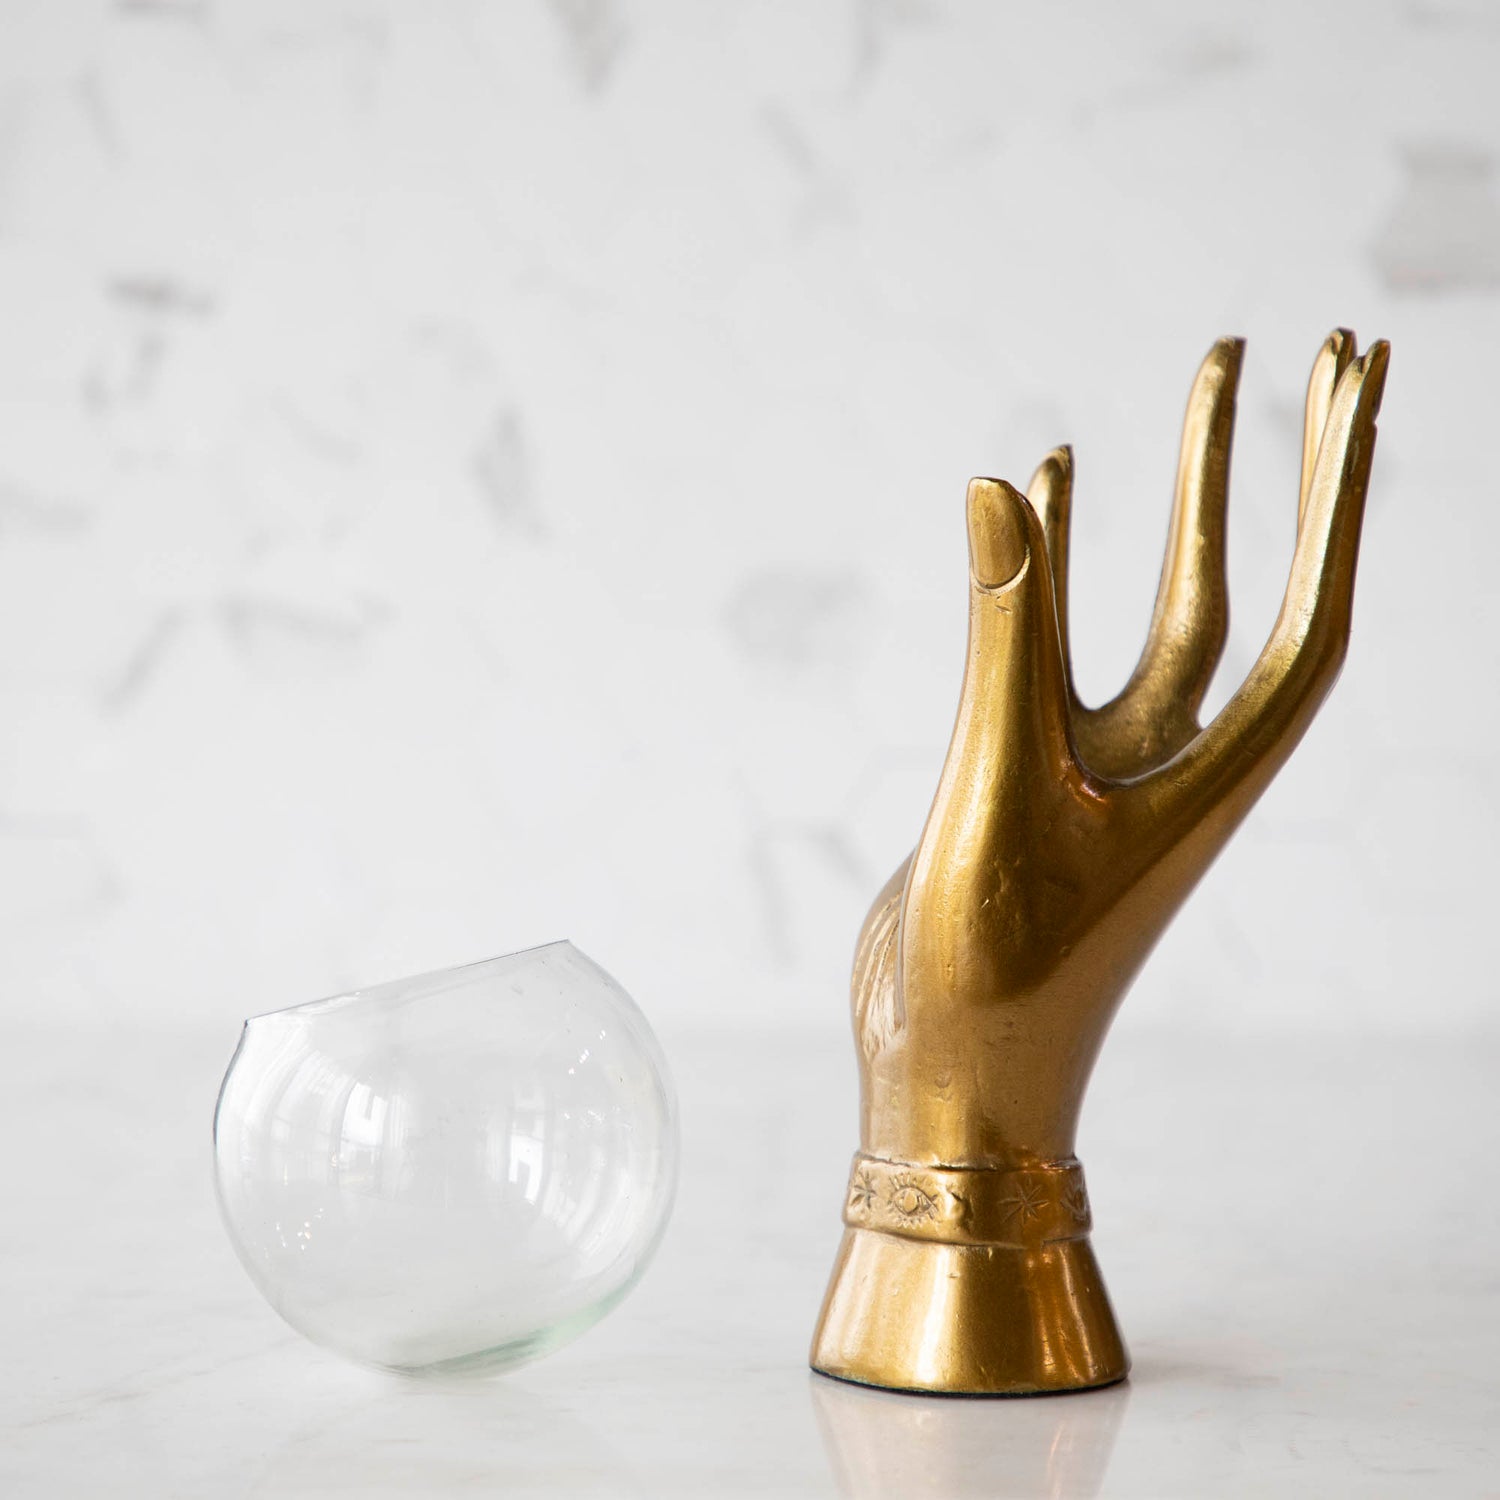 Metal 5.0&quot; x 4.0&quot; x 10.5&quot;, hand-shaped terranium with a glass globe next to it.